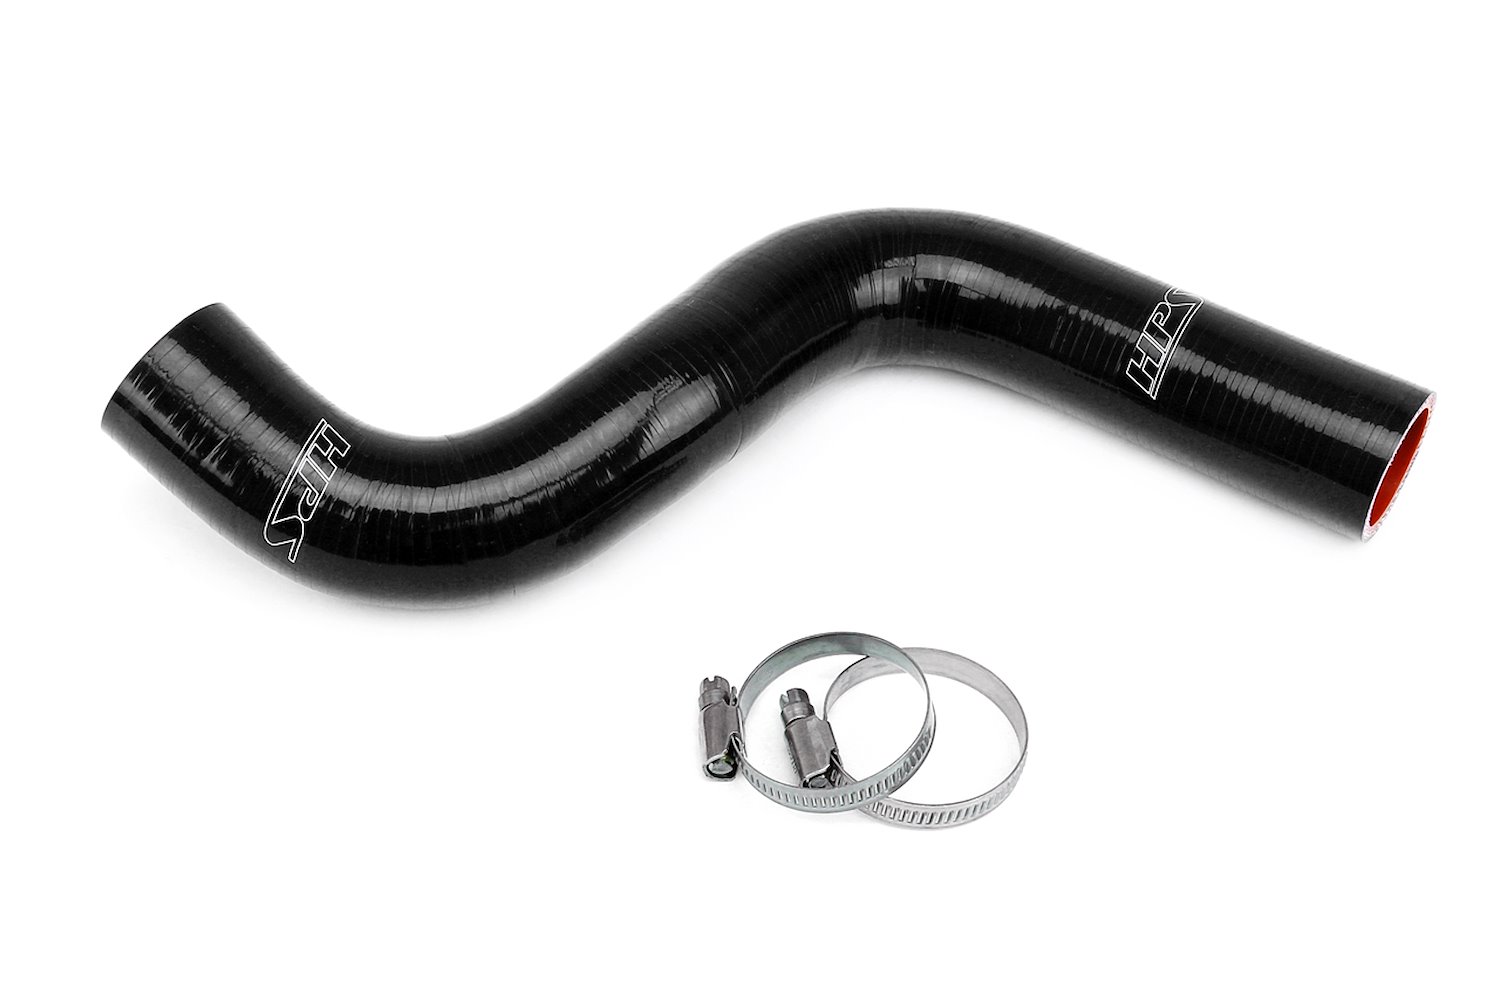 57-2061-BLK Radiator Hose Kit, 3-Ply Reinforced Silicone, Replaces Rubber Upper Radiator Coolant Hose.